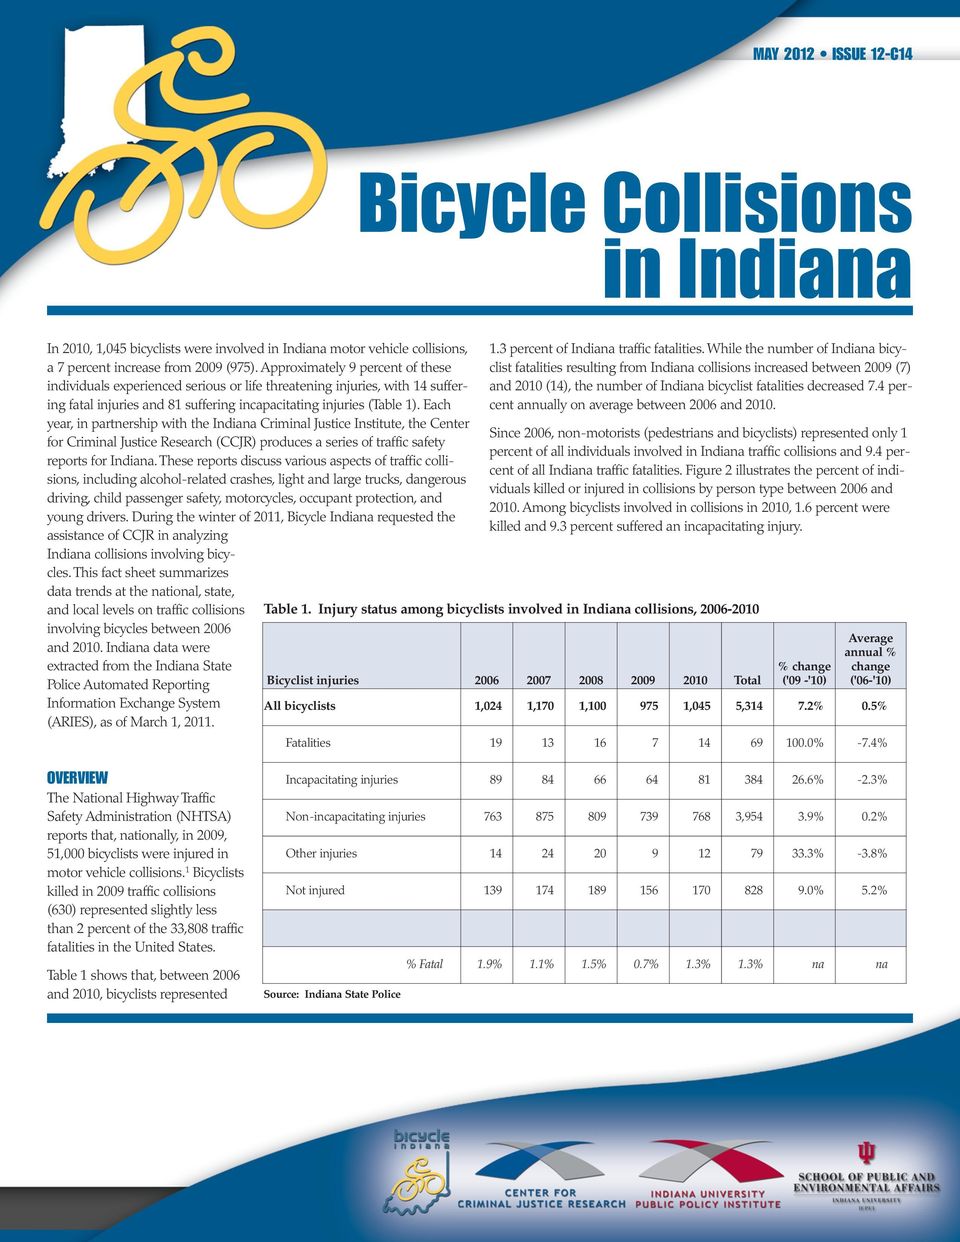 Each year, in partnership with the Indiana Criminal Justice Institute, the Center for Criminal Justice Research (CCJR) produces a series of traffic safety reports for Indiana.